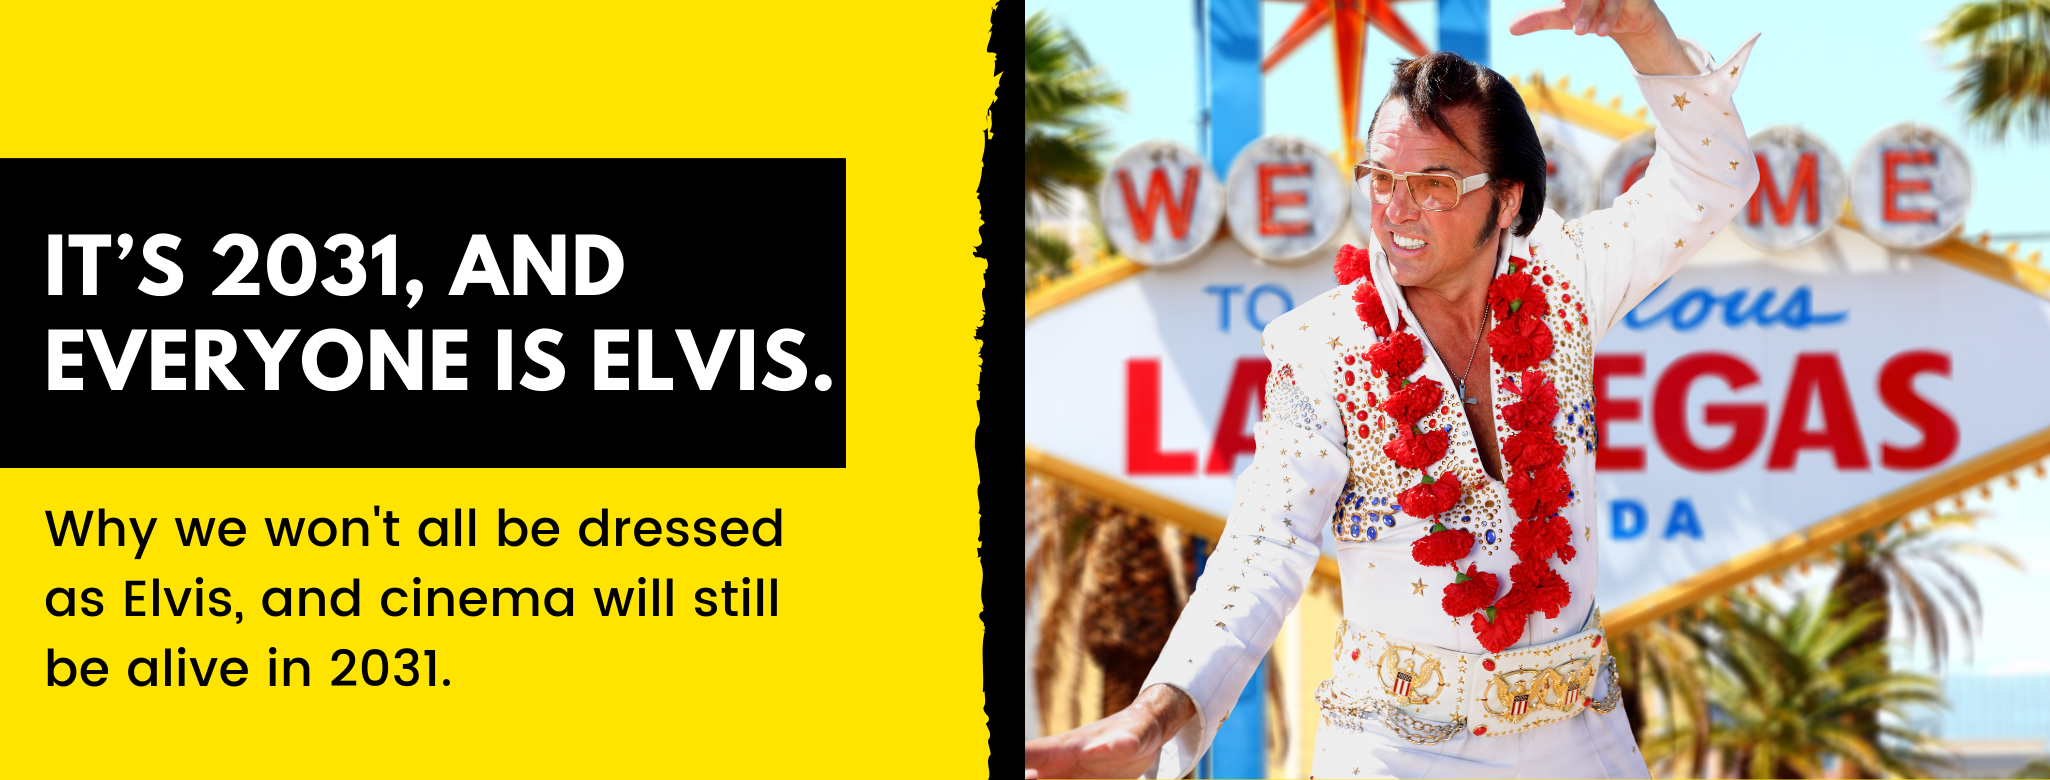 It’s 2031, and everyone is Elvis.